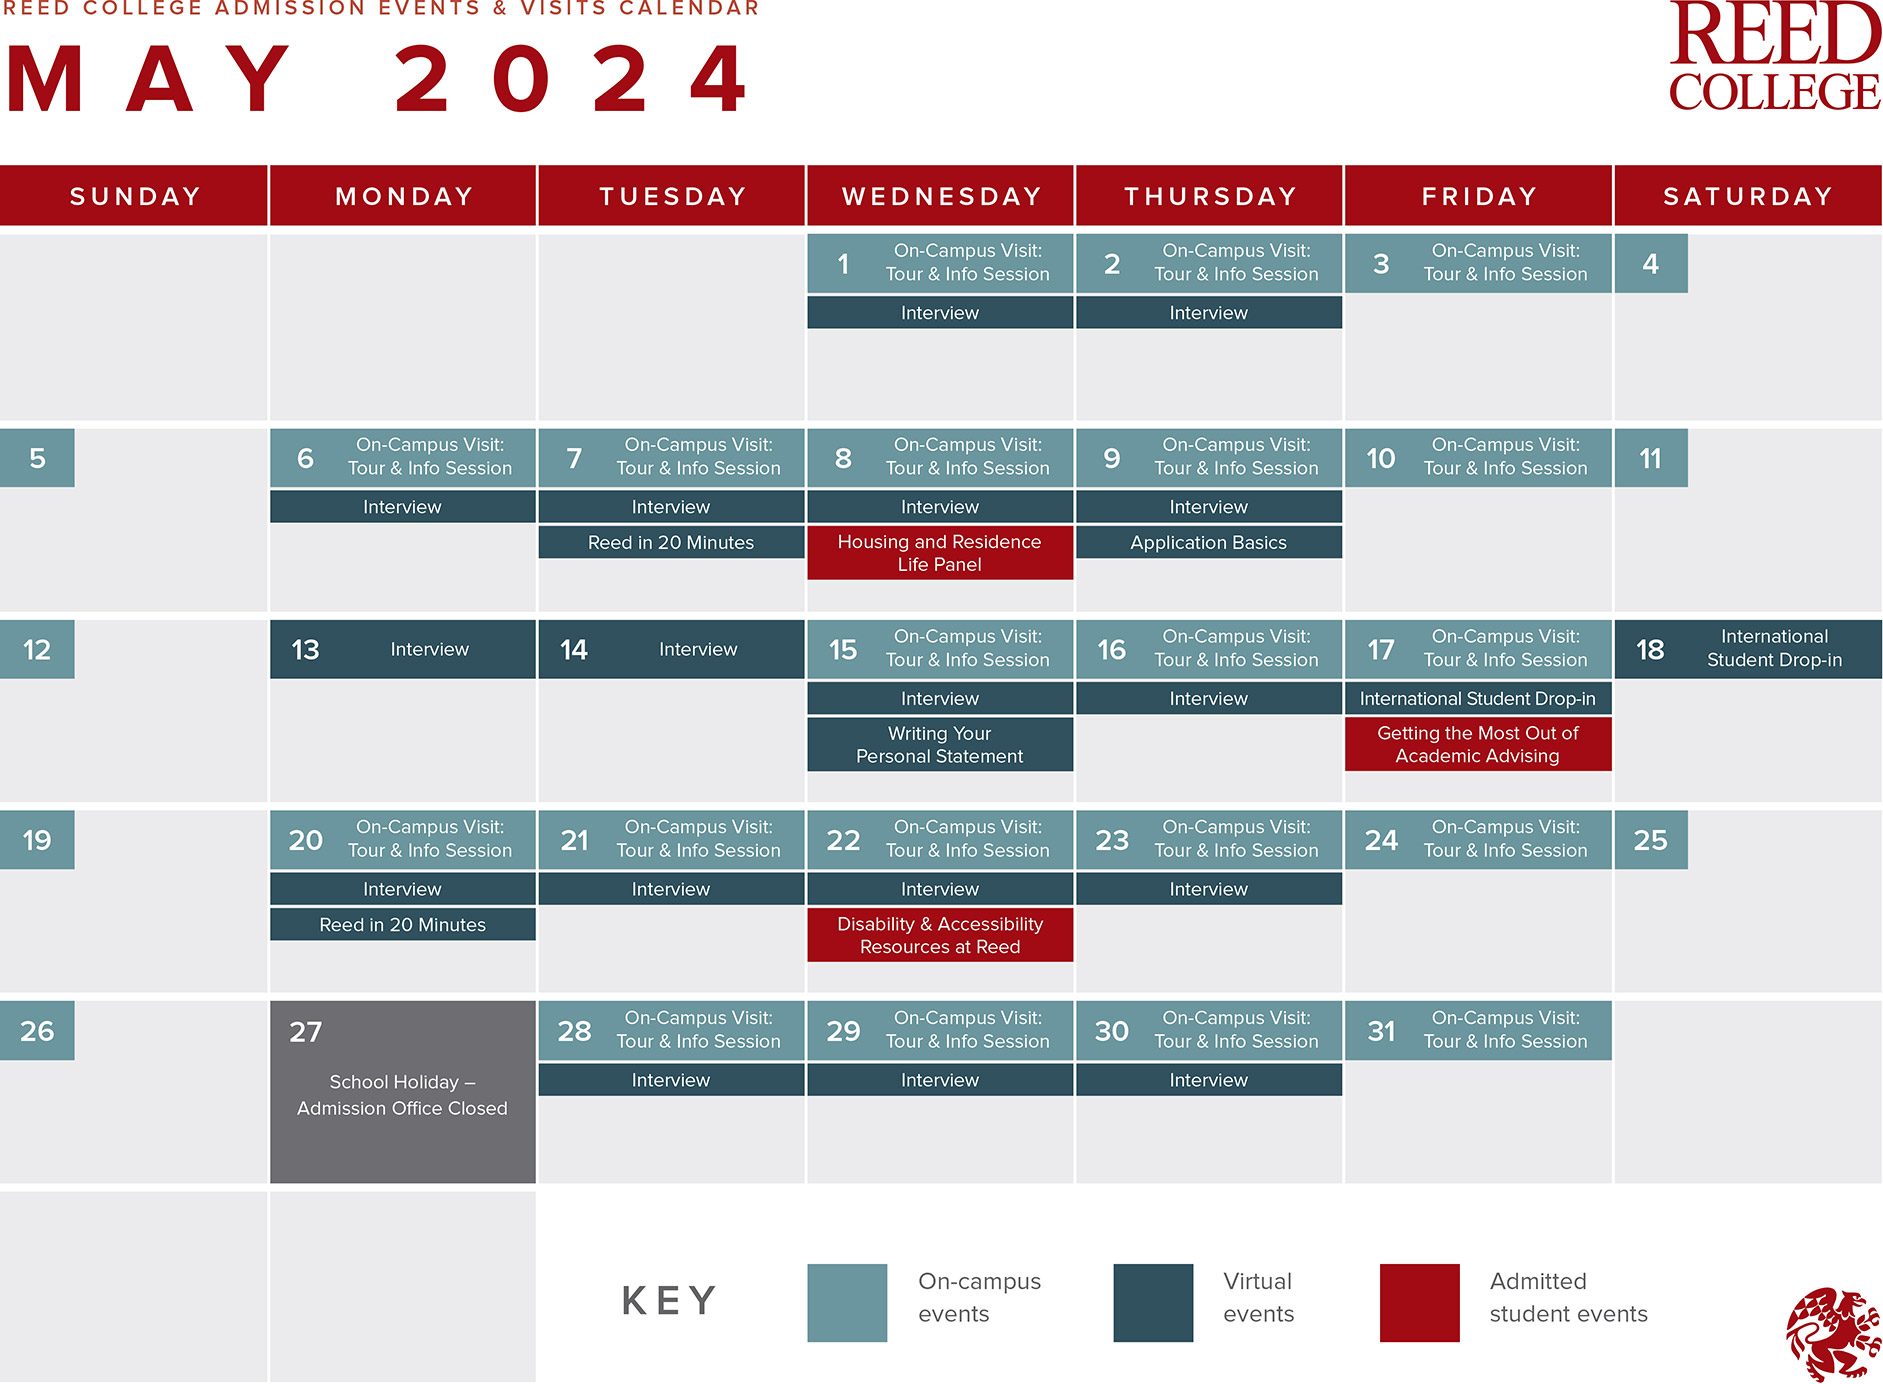 May 2024 Admission events calendar